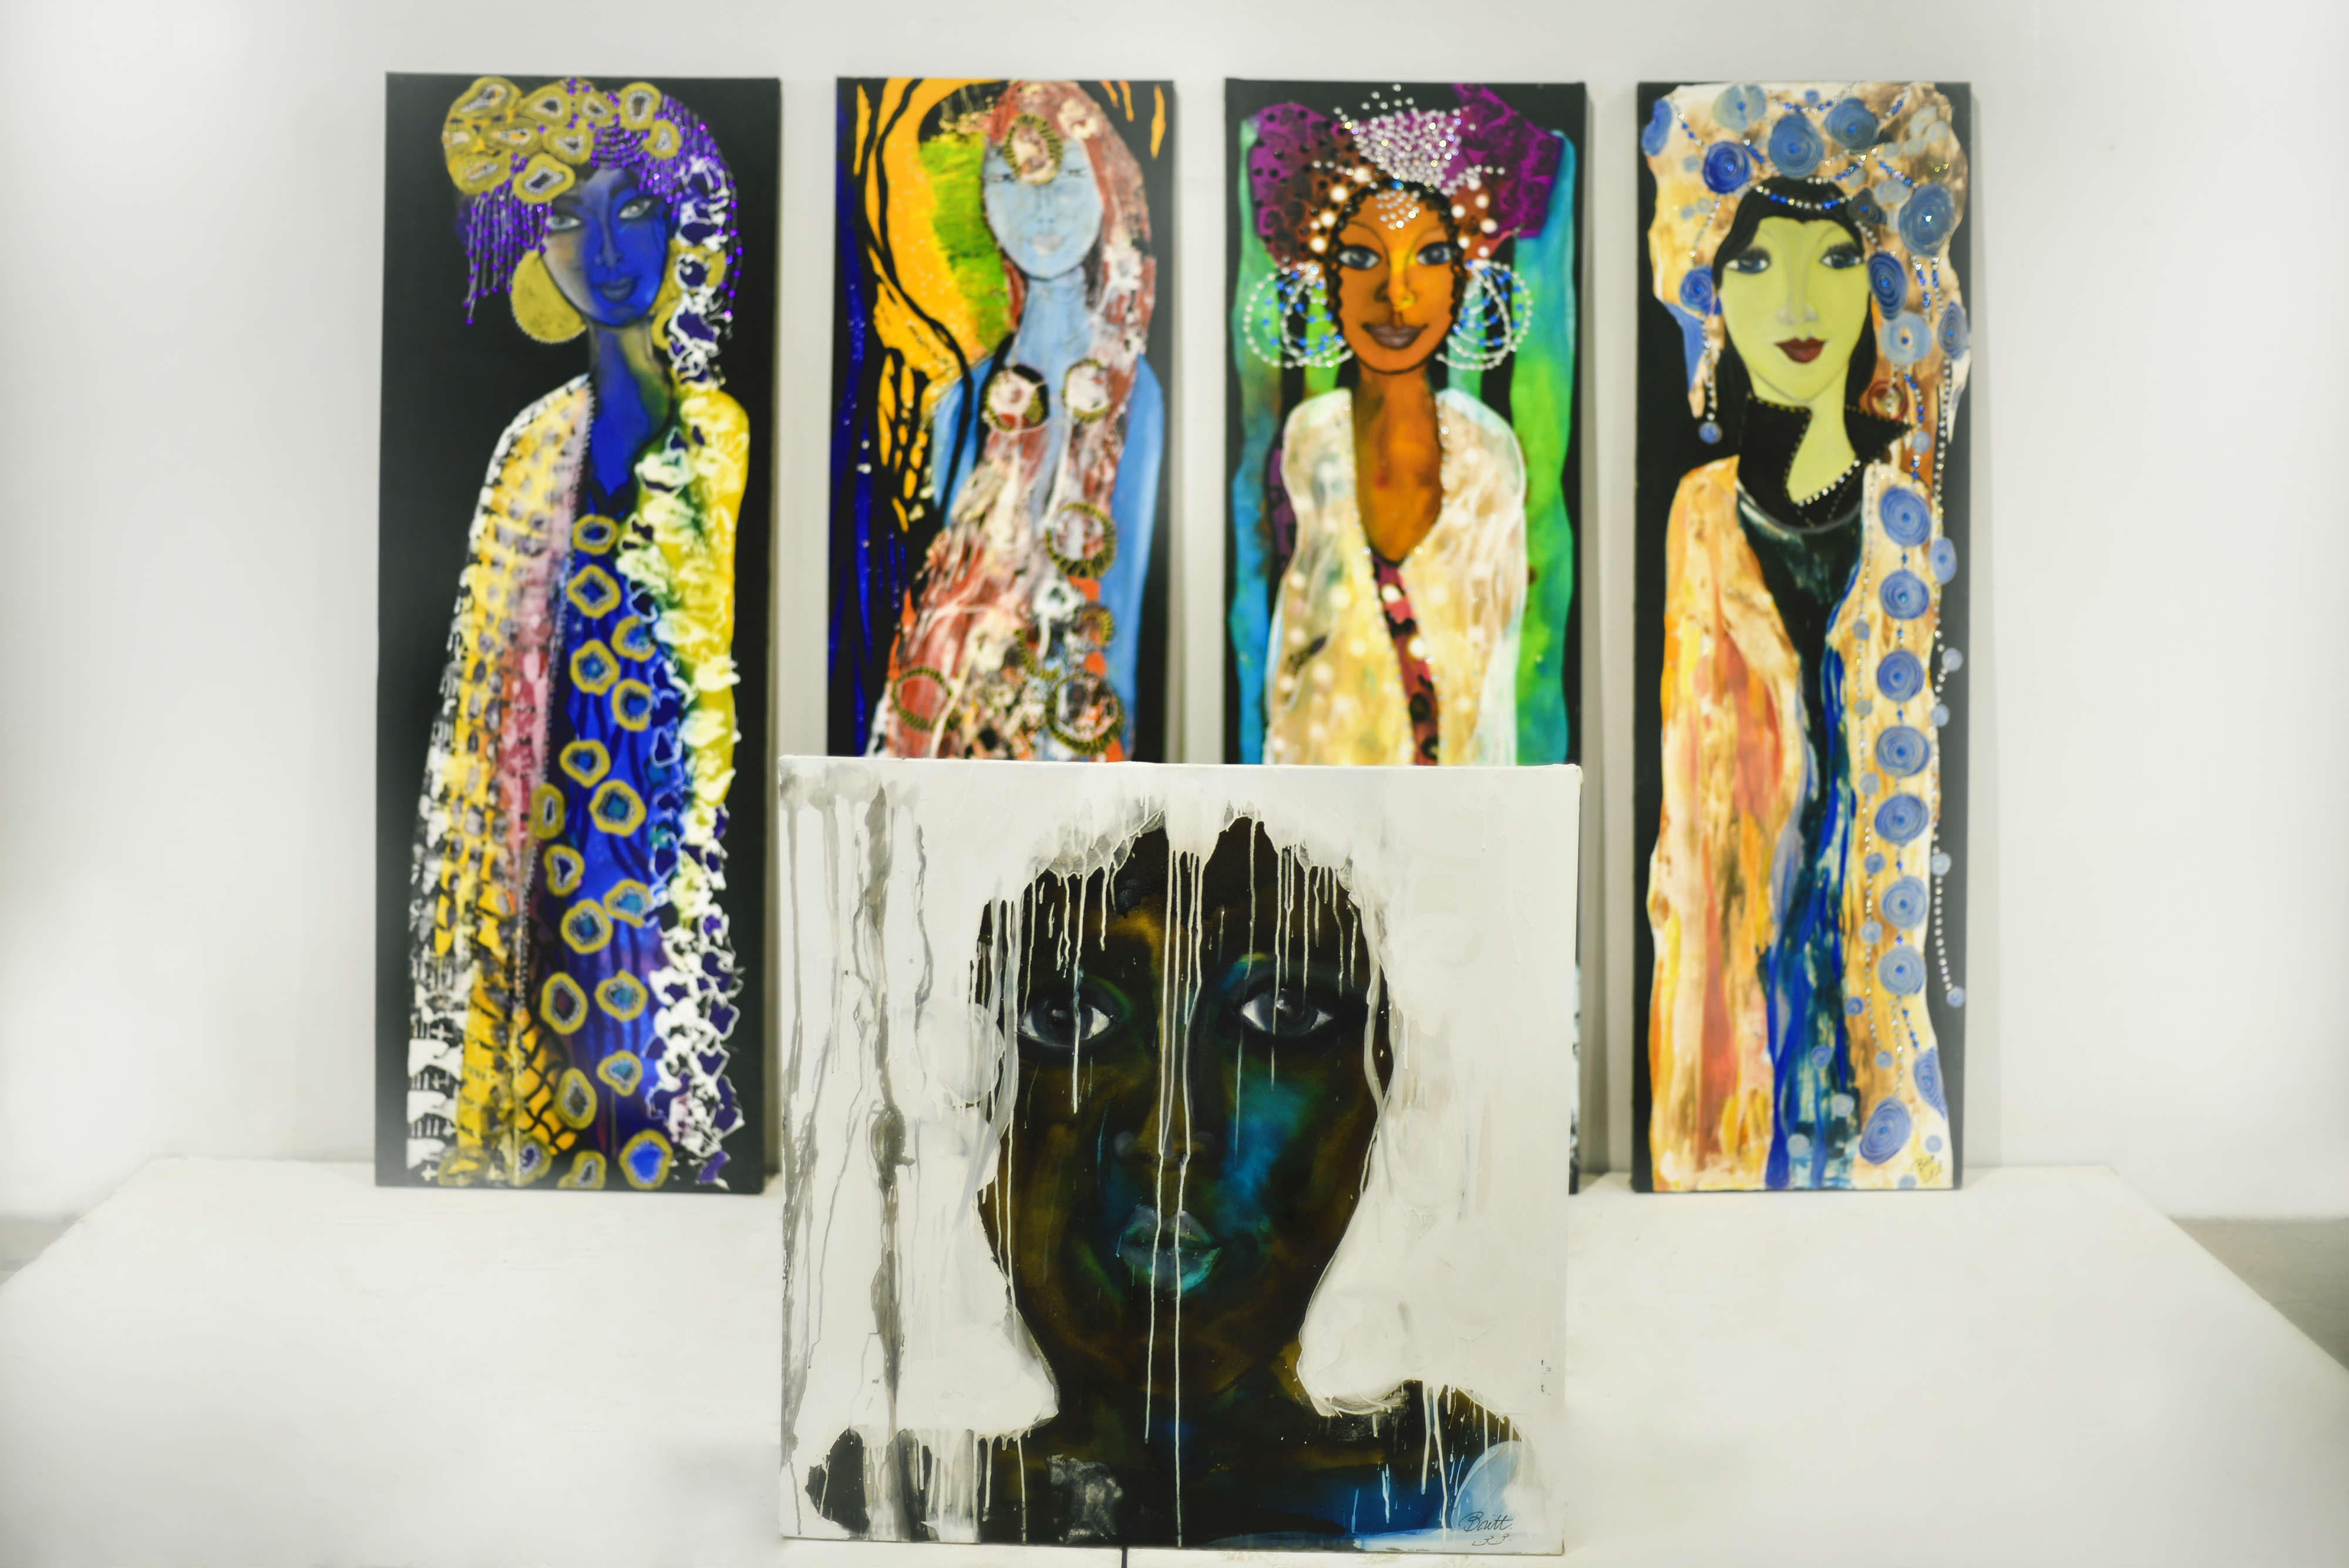 THE CAIRO ART FAIR II EGYPT’S LARGEST AND MOST EXCLUSIVE ART SHOW TO